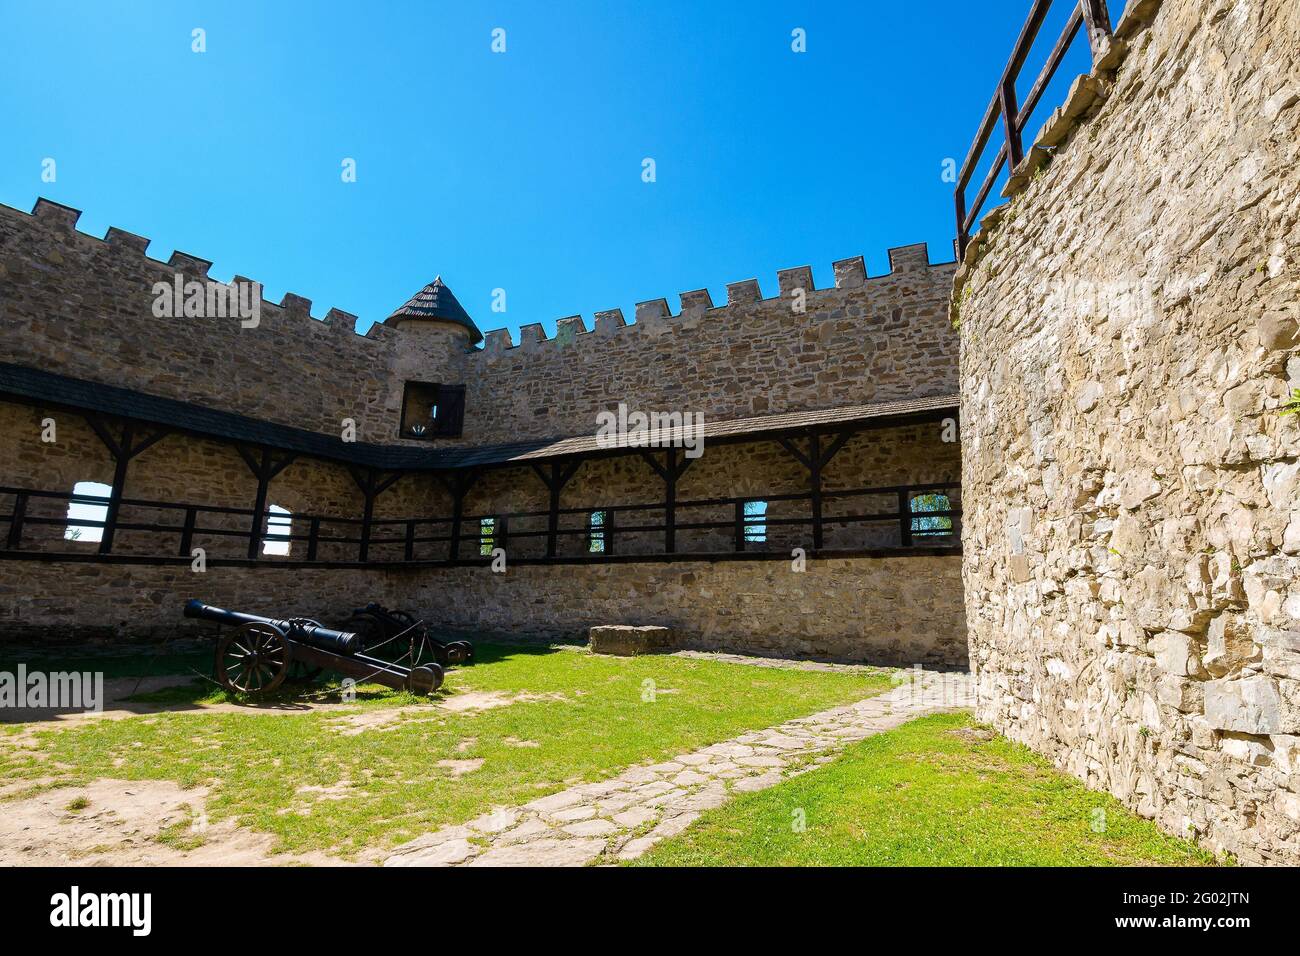 Stara Lubovna, Slovakia - 28 AUG 2016: ancient cannon in the inner courtyard of the castle. great stone walls of a fortrece. popular travel destinatio Stock Photo